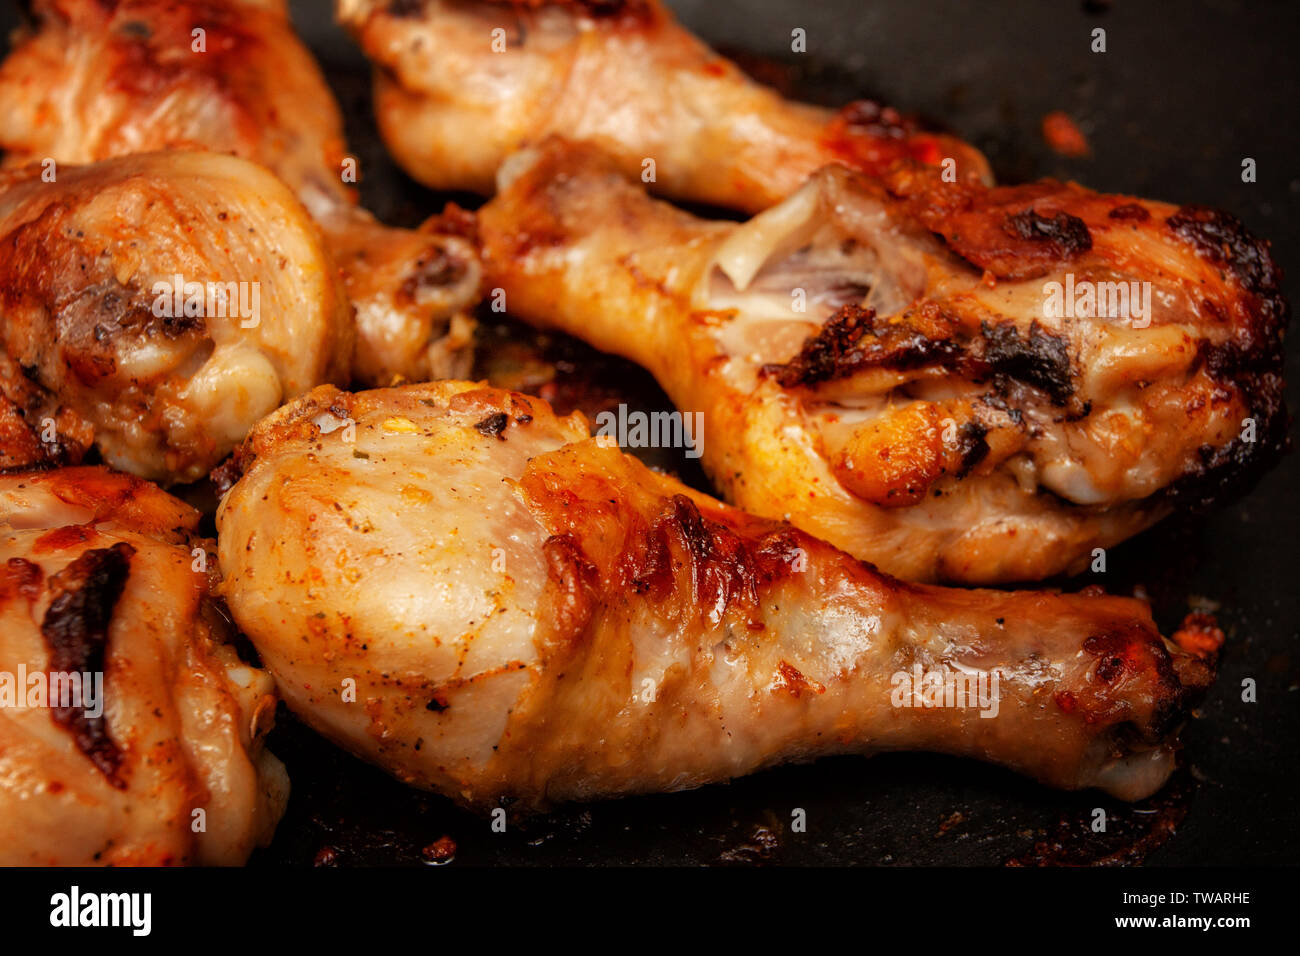 Roasted chicken legs in a pan Stock Photo